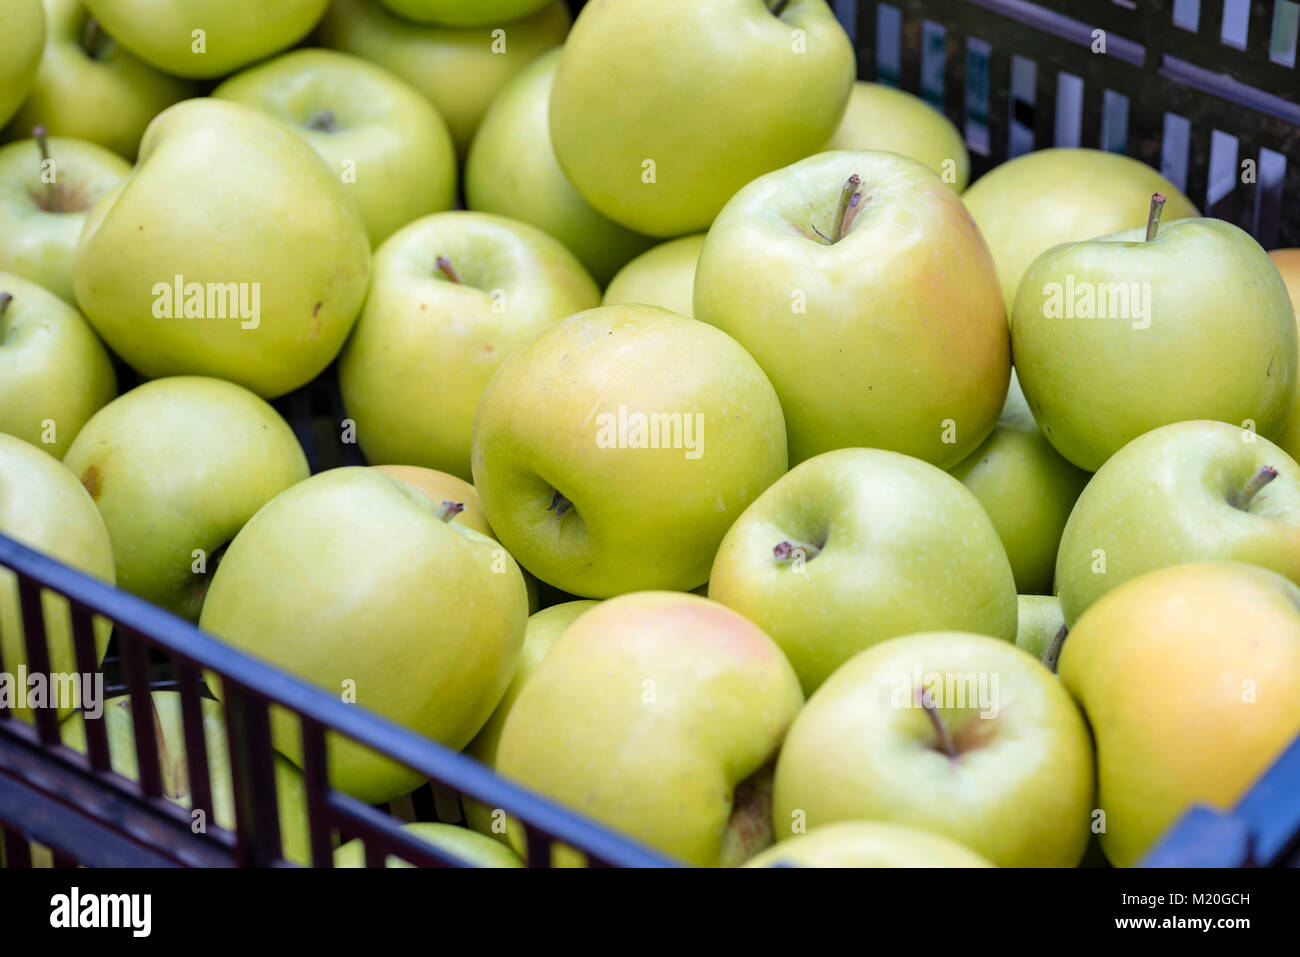 Organic fresh apple in boxes displayed at market, closeup, top view. Healthy golden delicious apple at market stall, Sydney, Australia. Stock Photo